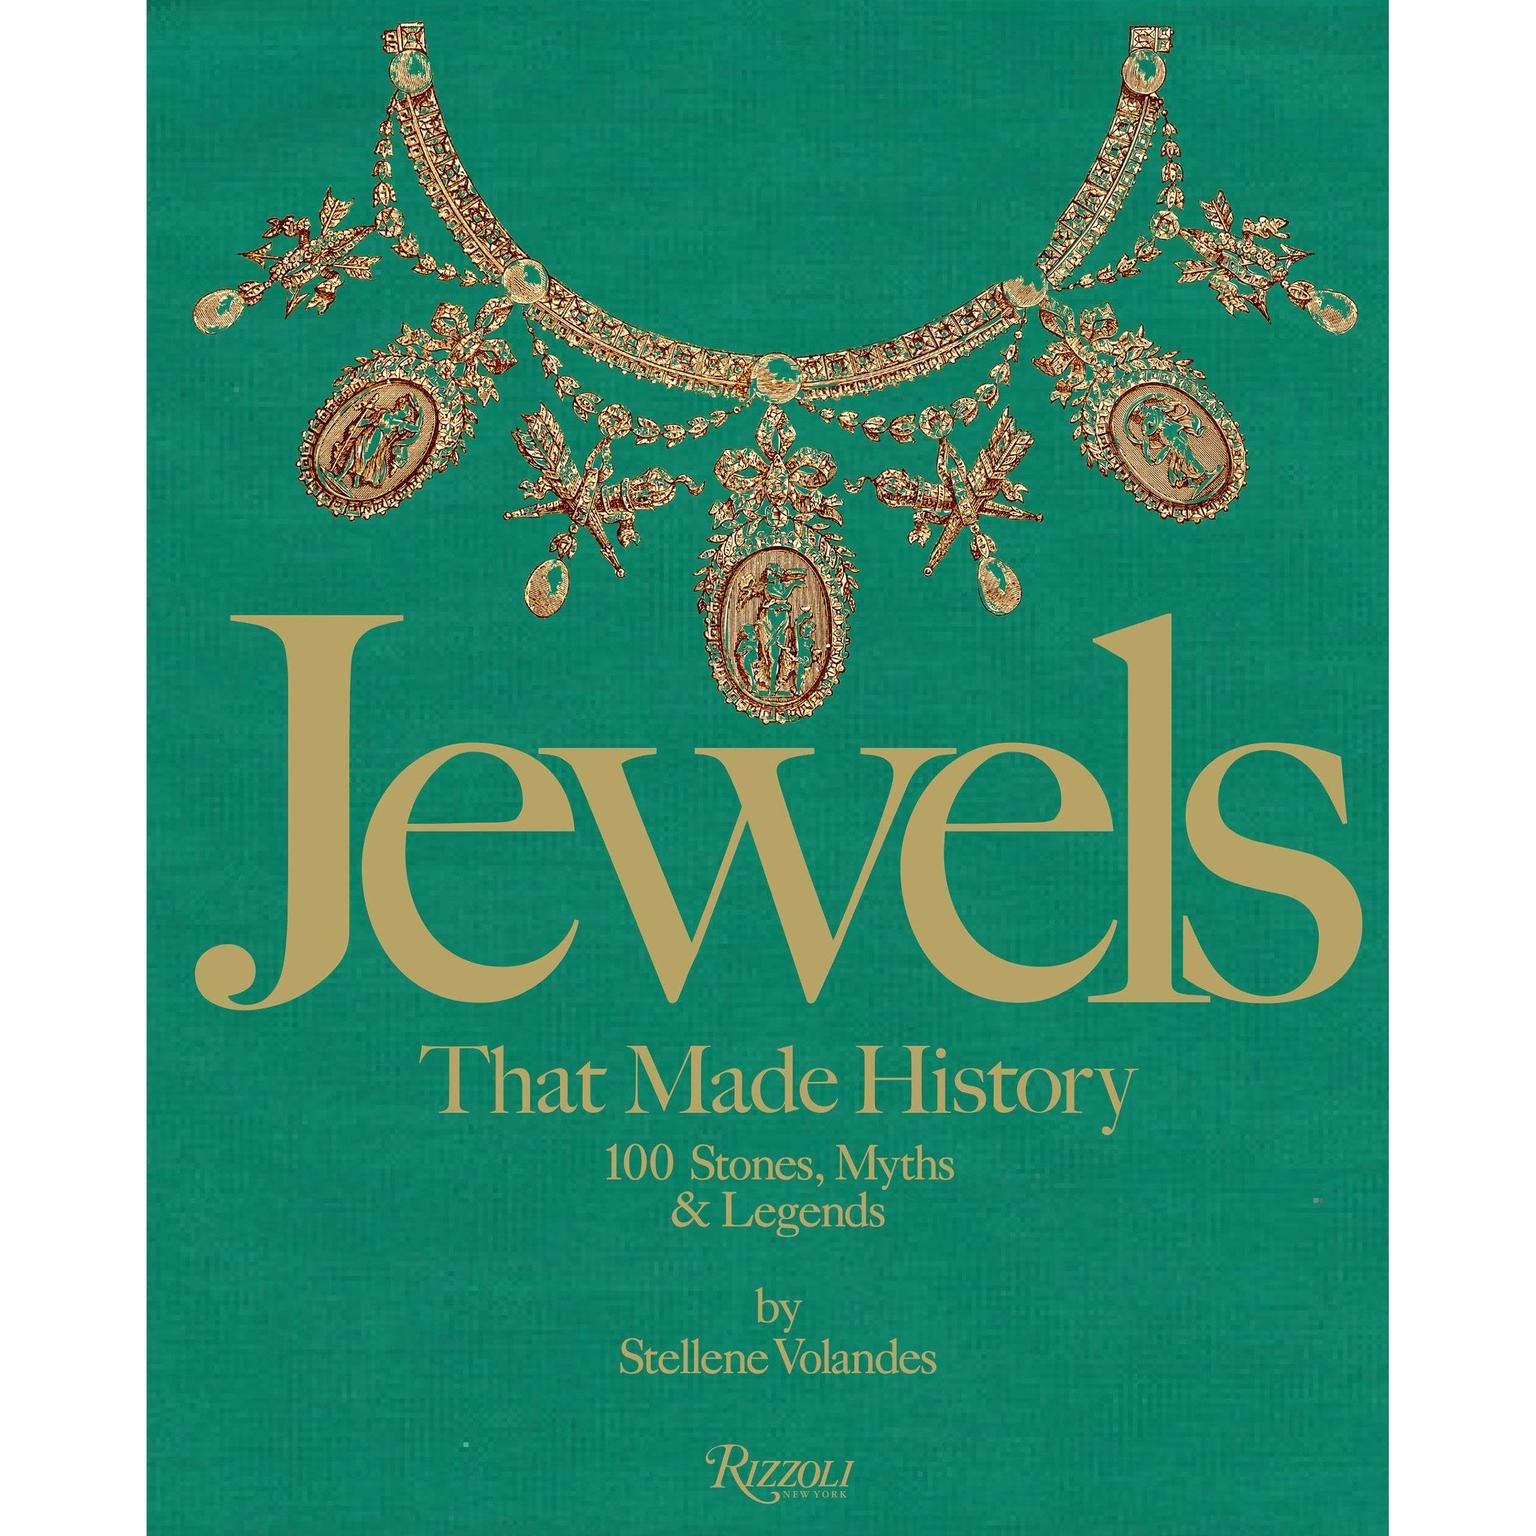 ‘Jewels that Made History' by Stellene Volandes